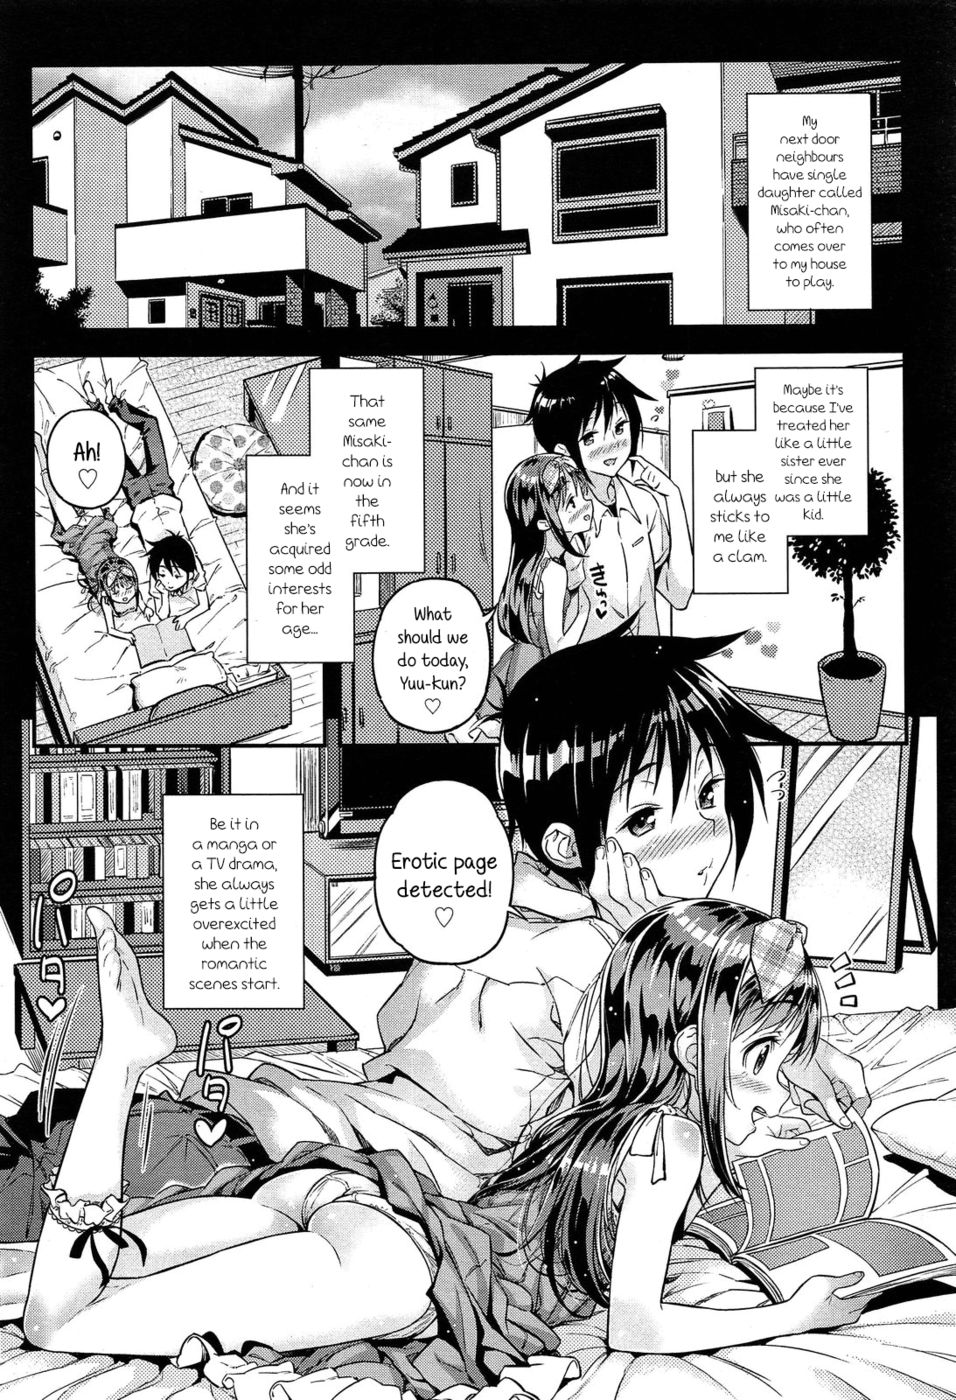 Hentai Manga Comic-Let's watch it together!-Read-2